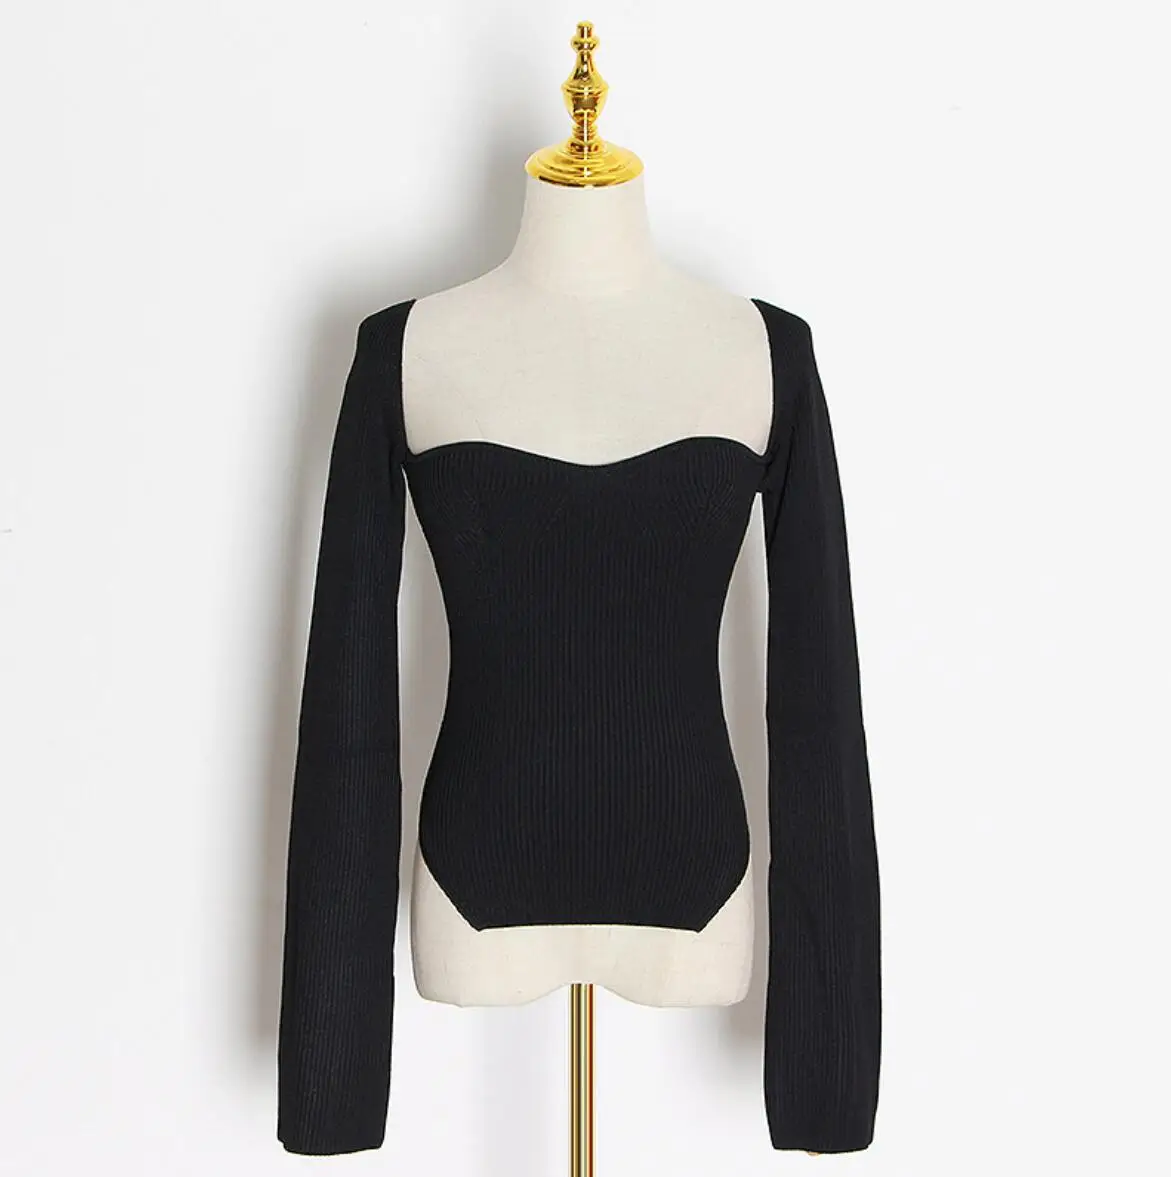 Solid Black Arc Square Collar Knitted T-shirt Slim Stretch Cut Long Sleeve Women Top